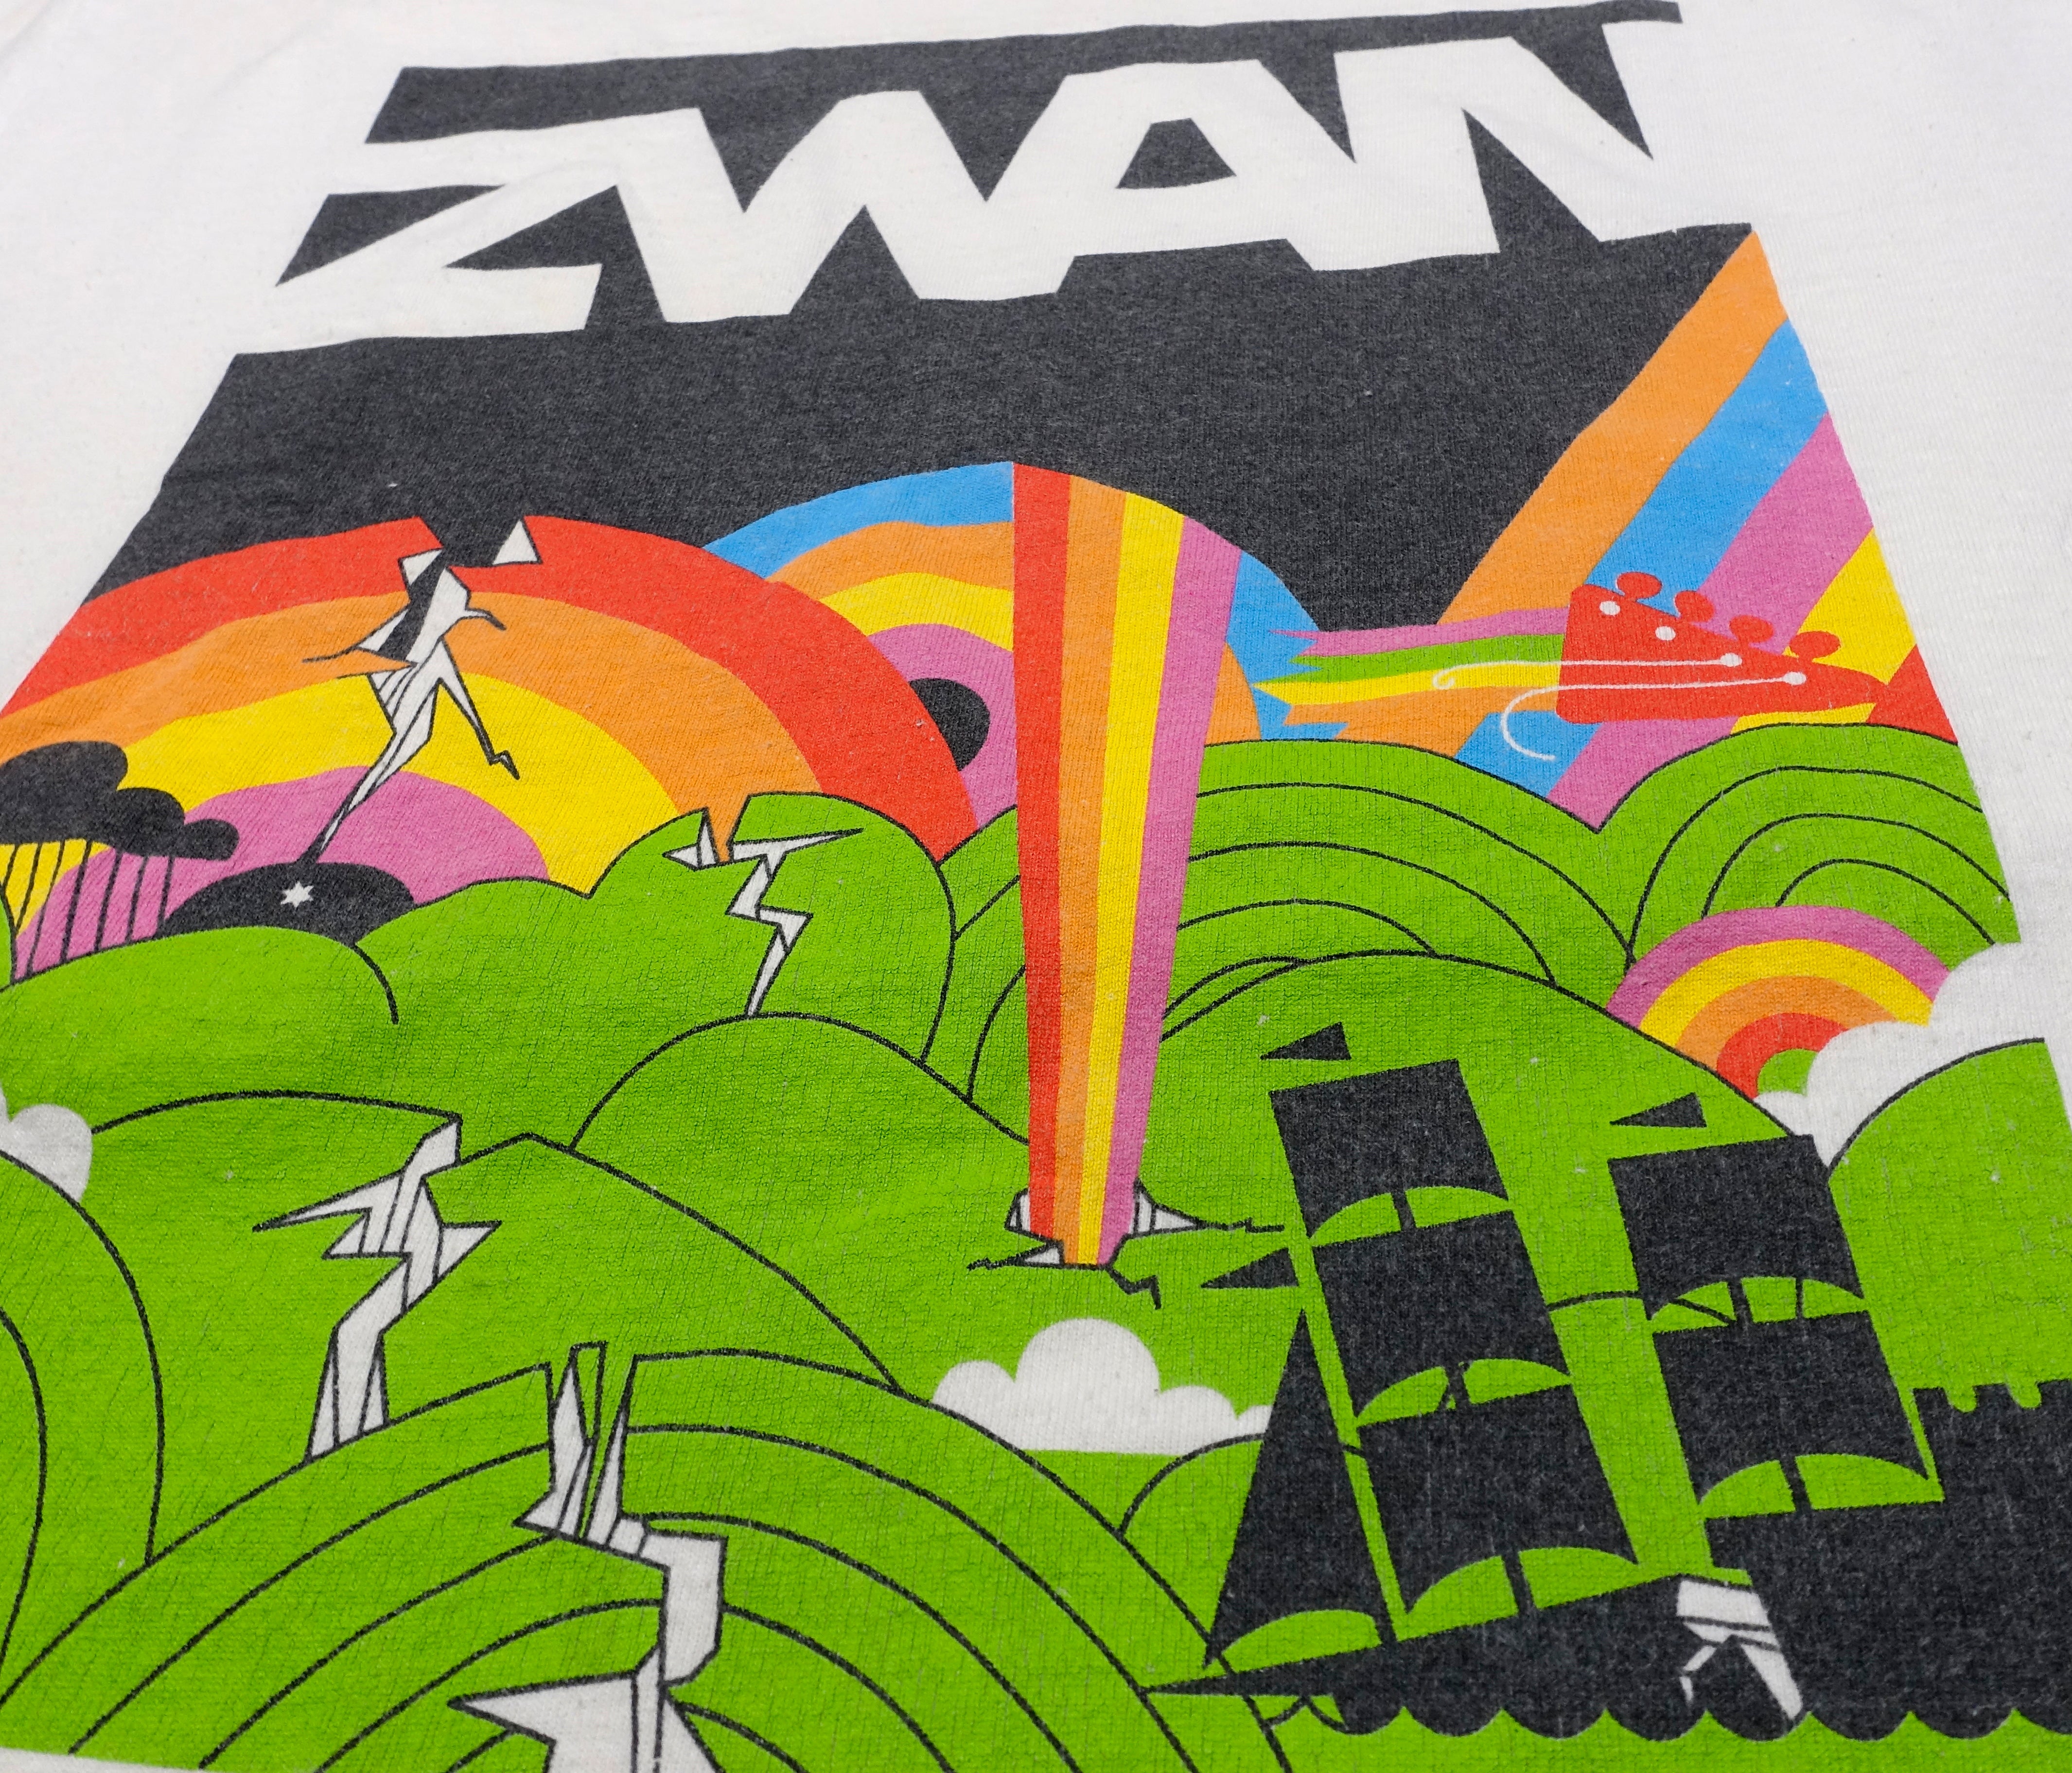 Zwan - Mary Star Of The Sea 2003 Tour Shirt Size Large